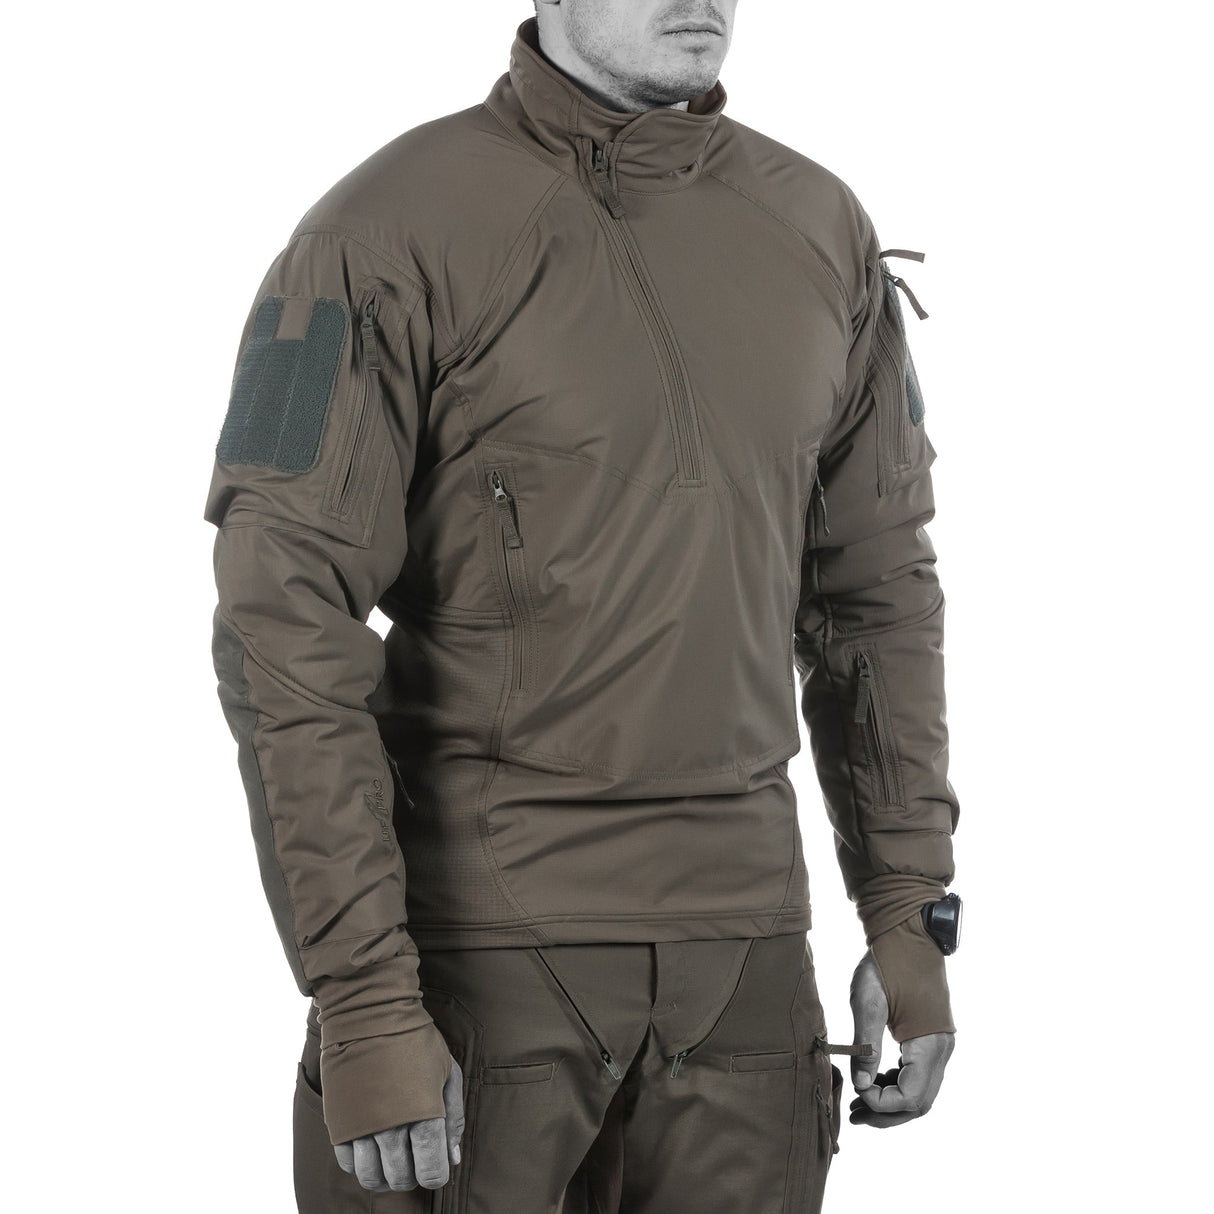 UF PRO Ace Winter Combat Shirt: Stay Warm in Extreme Cold Conditions –  Urban Tactical